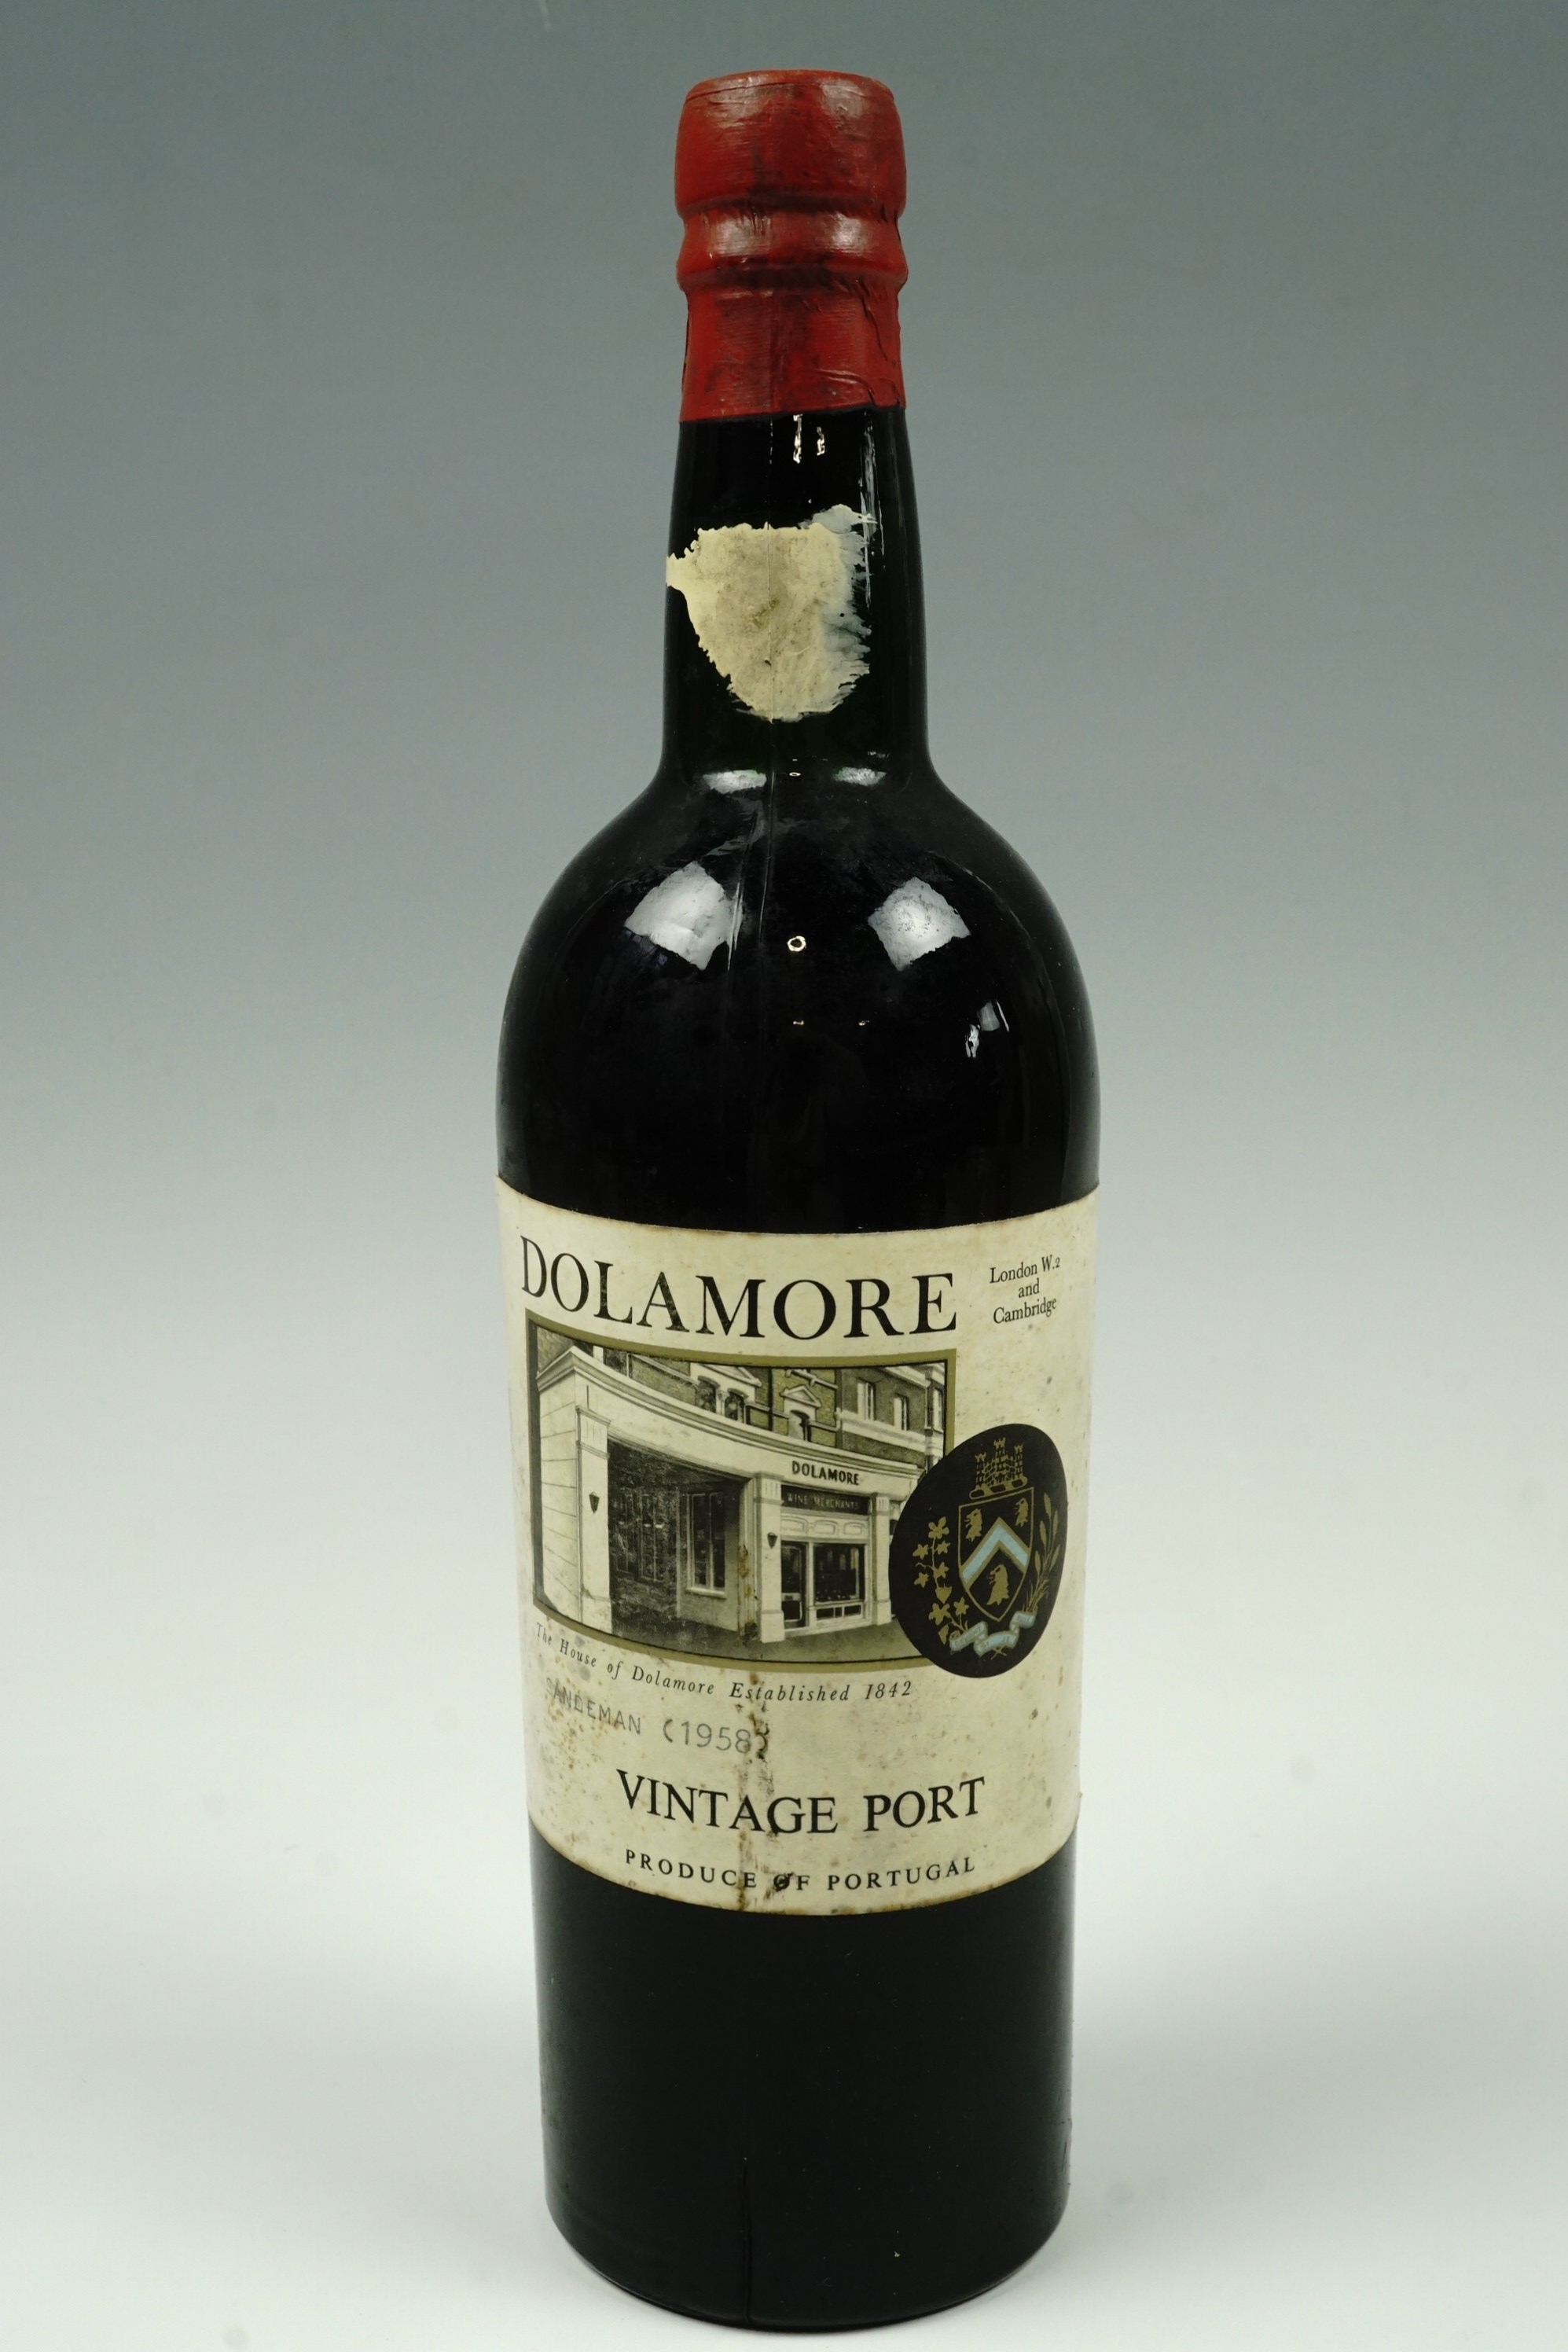 A bottle of Sandeman 1958 vintage port, bearing the label of the vintners Dolamore of London and